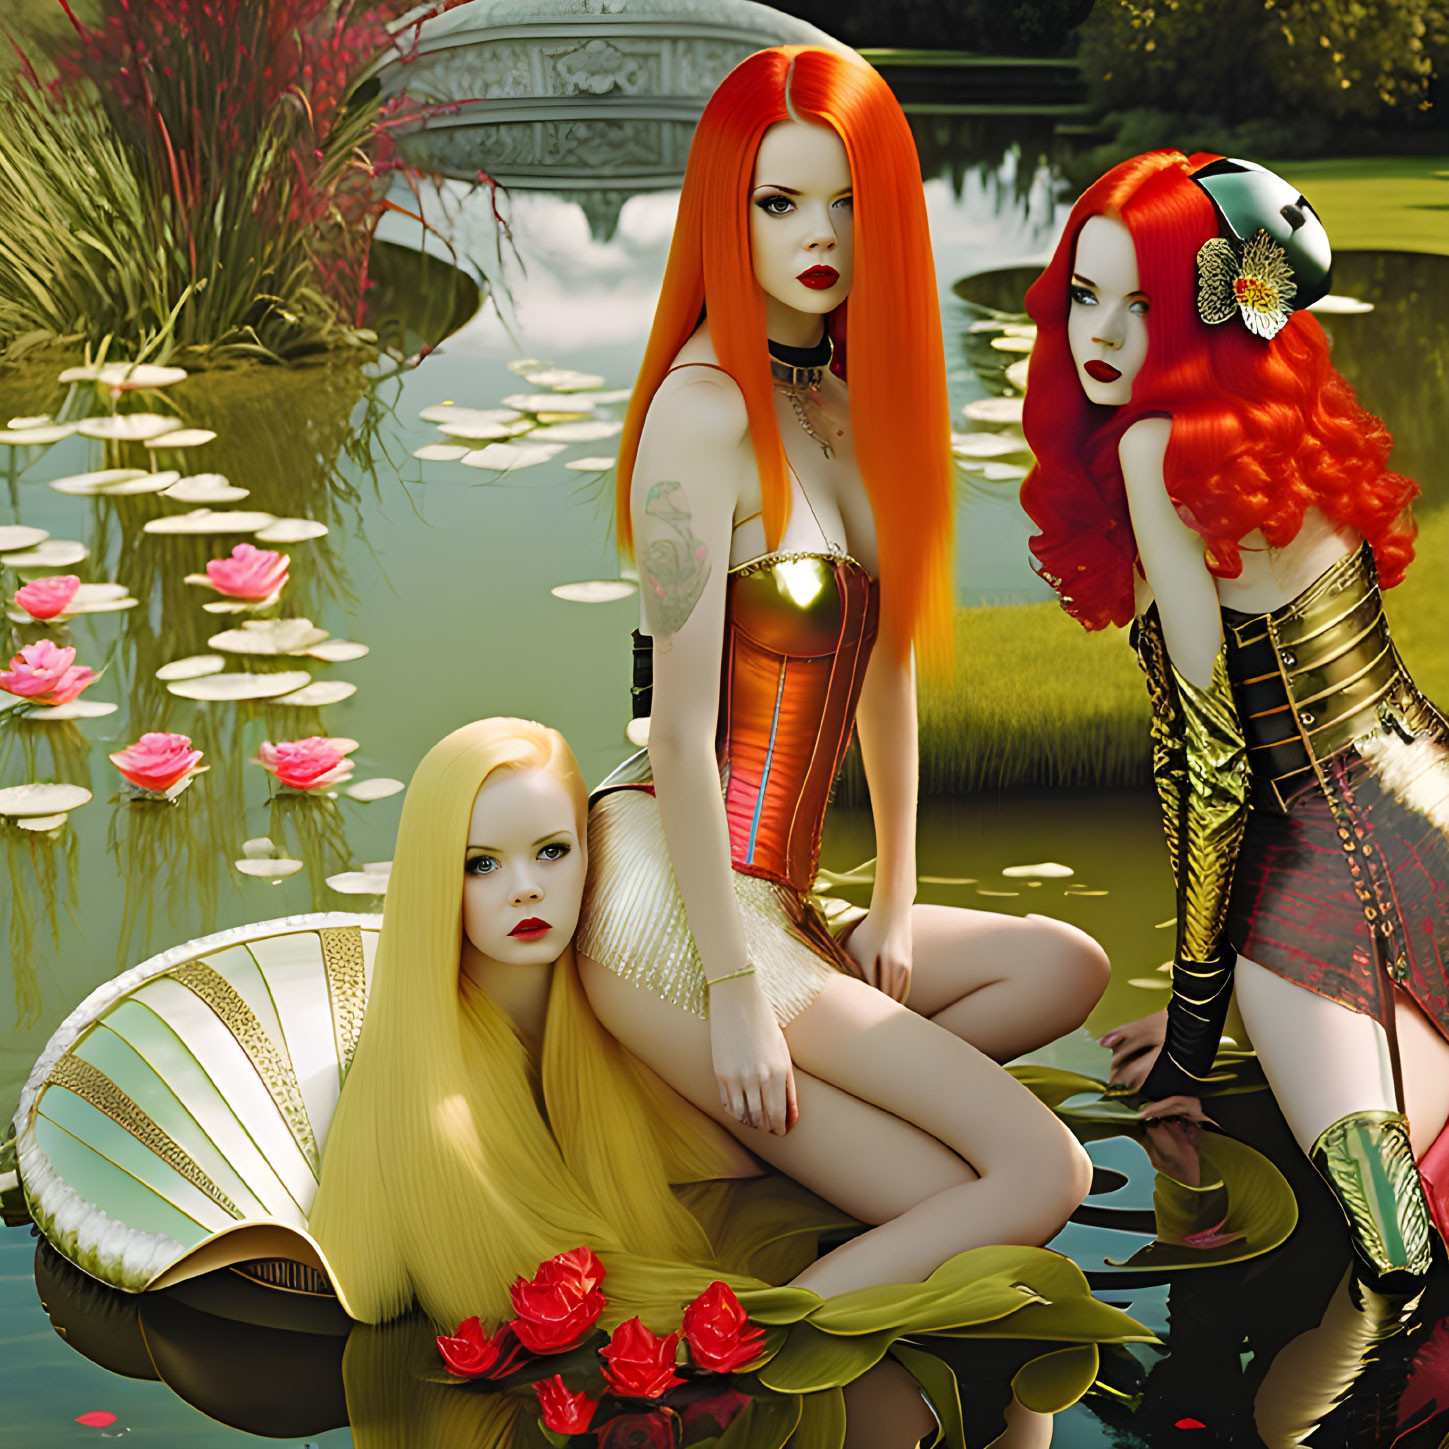 Three women with vibrant hair and unique outfits by a pond with water lilies